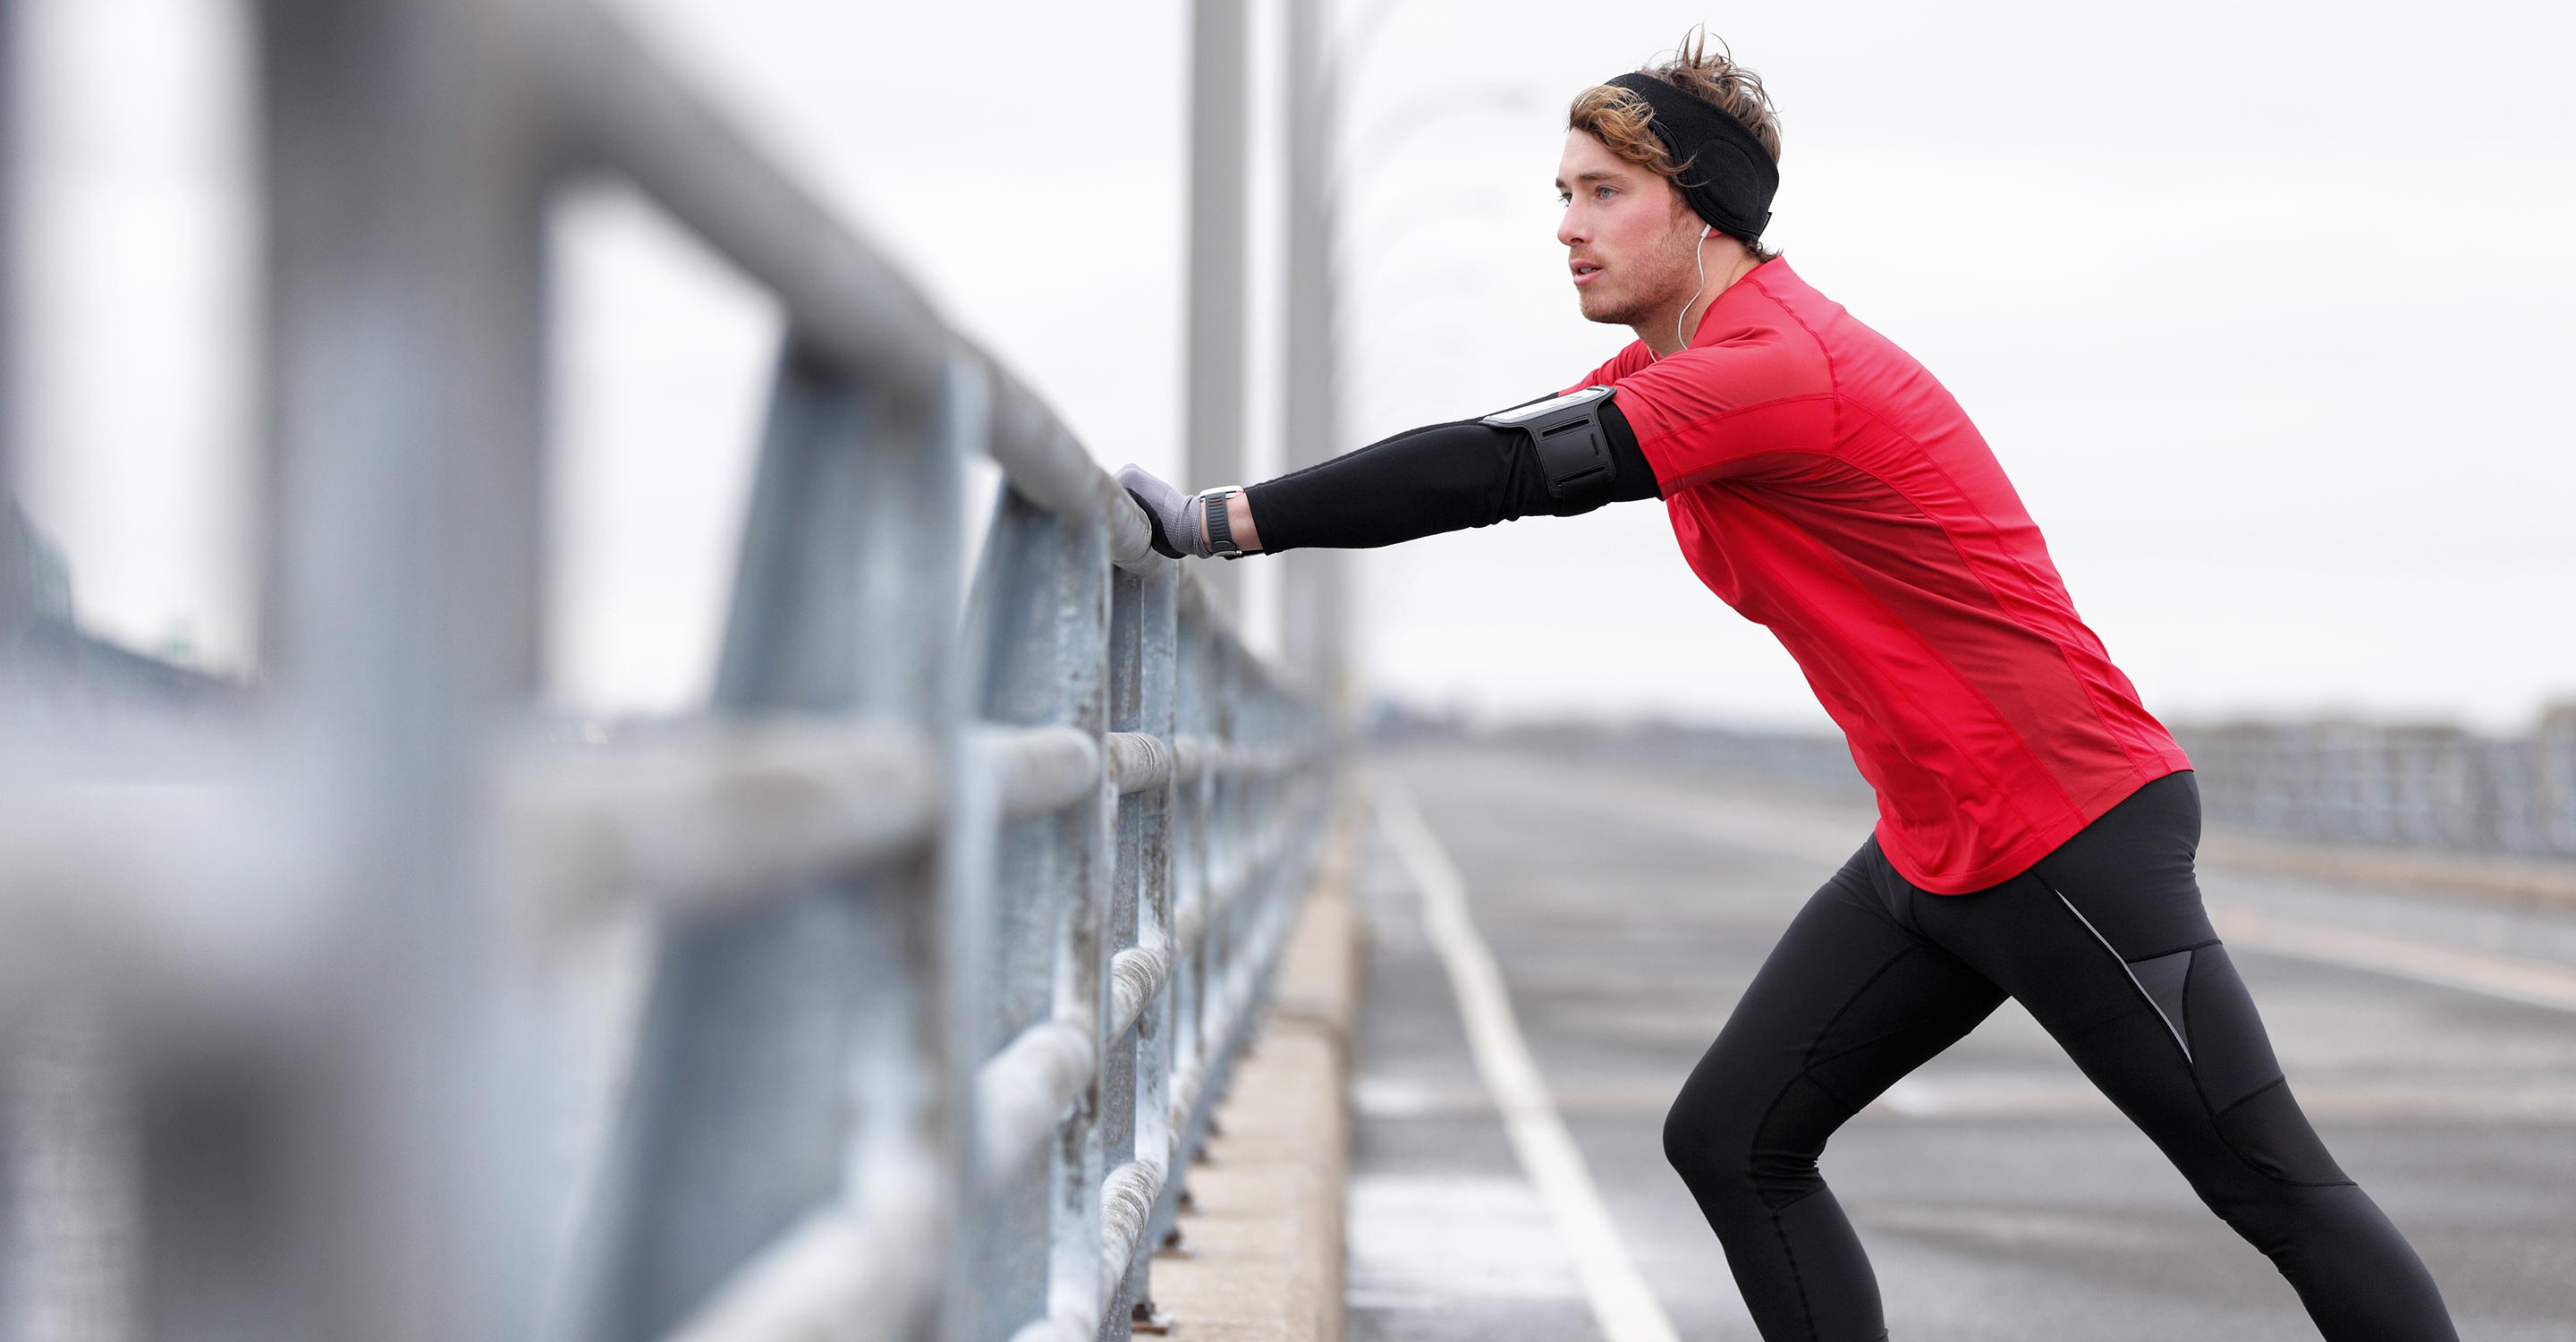 How to use air quality monitoring to optimize your exercise routine